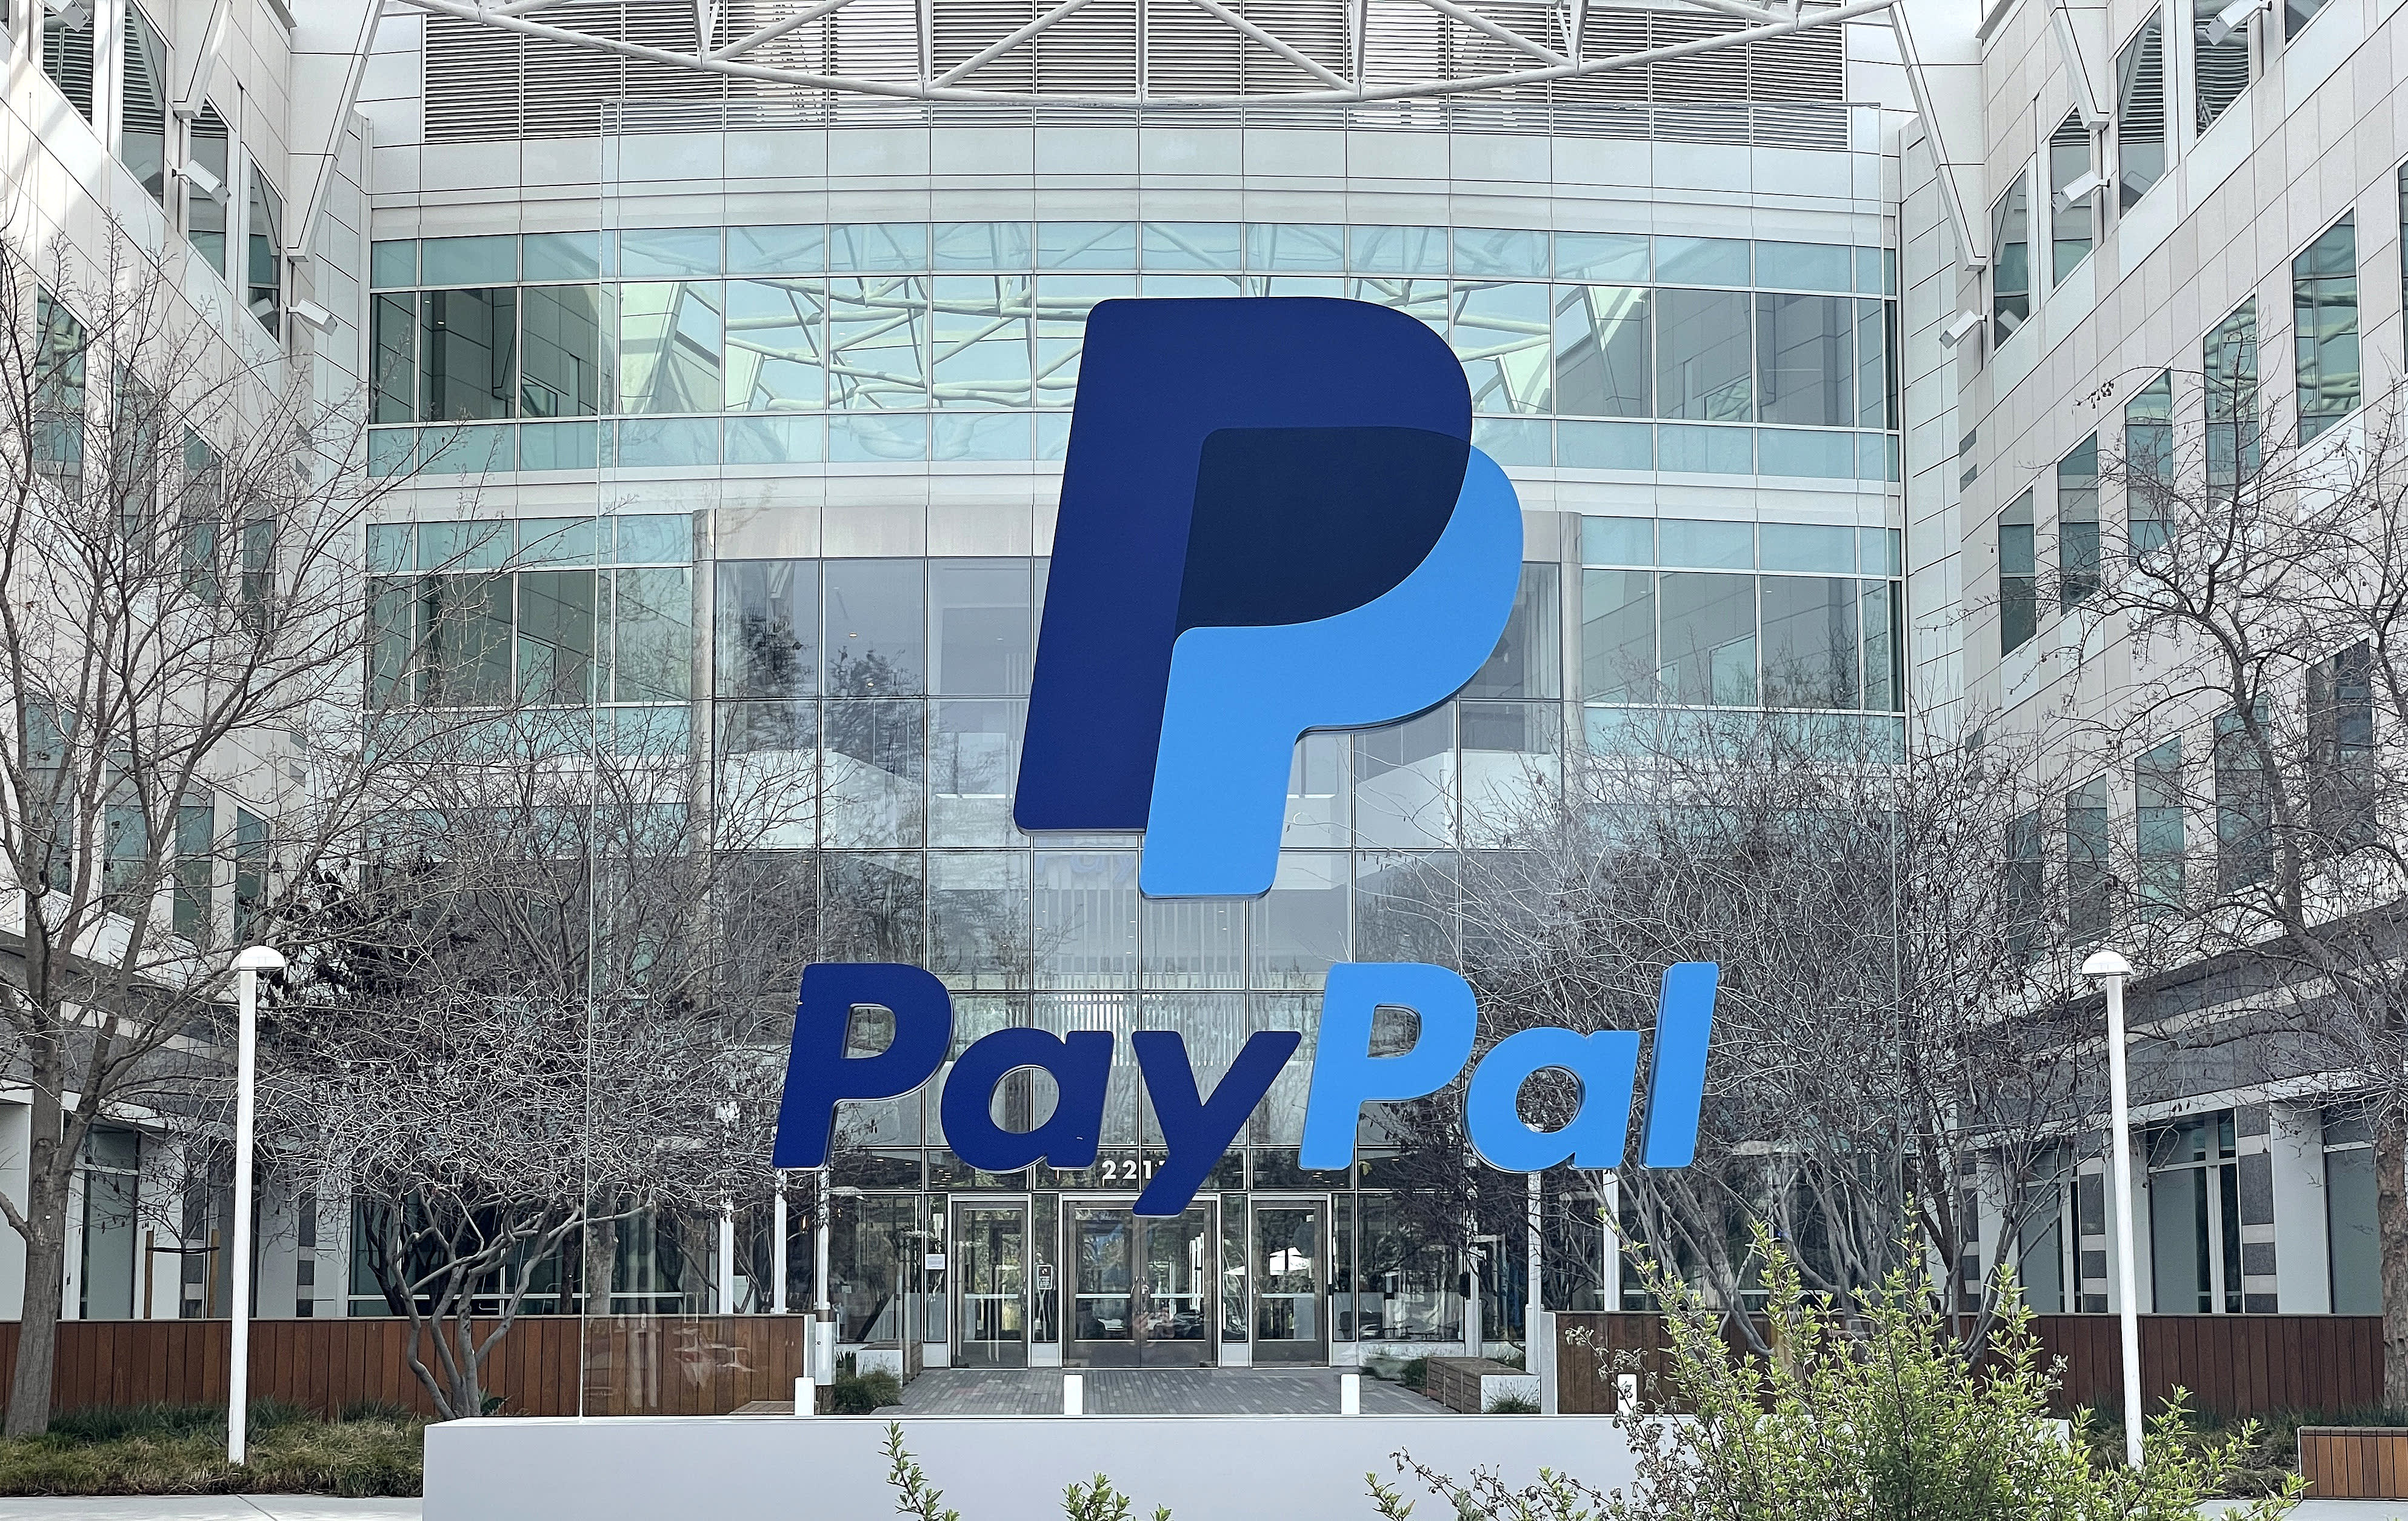 Raymond James downgrades PayPal, cites concern over potential market share decline